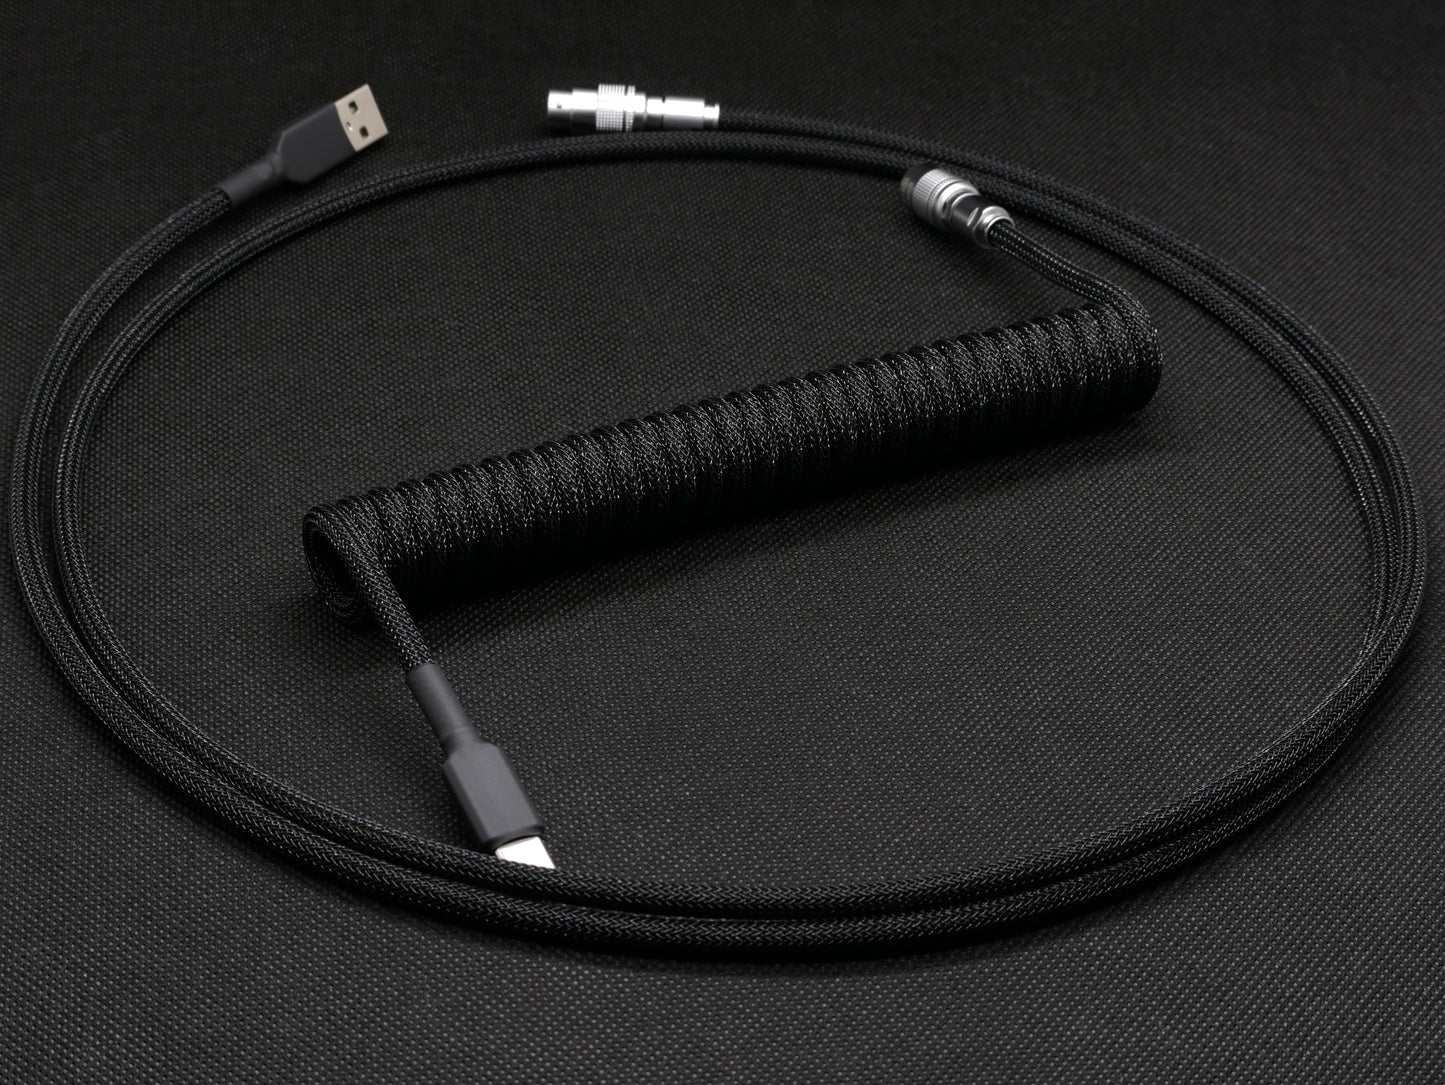 Black Cable